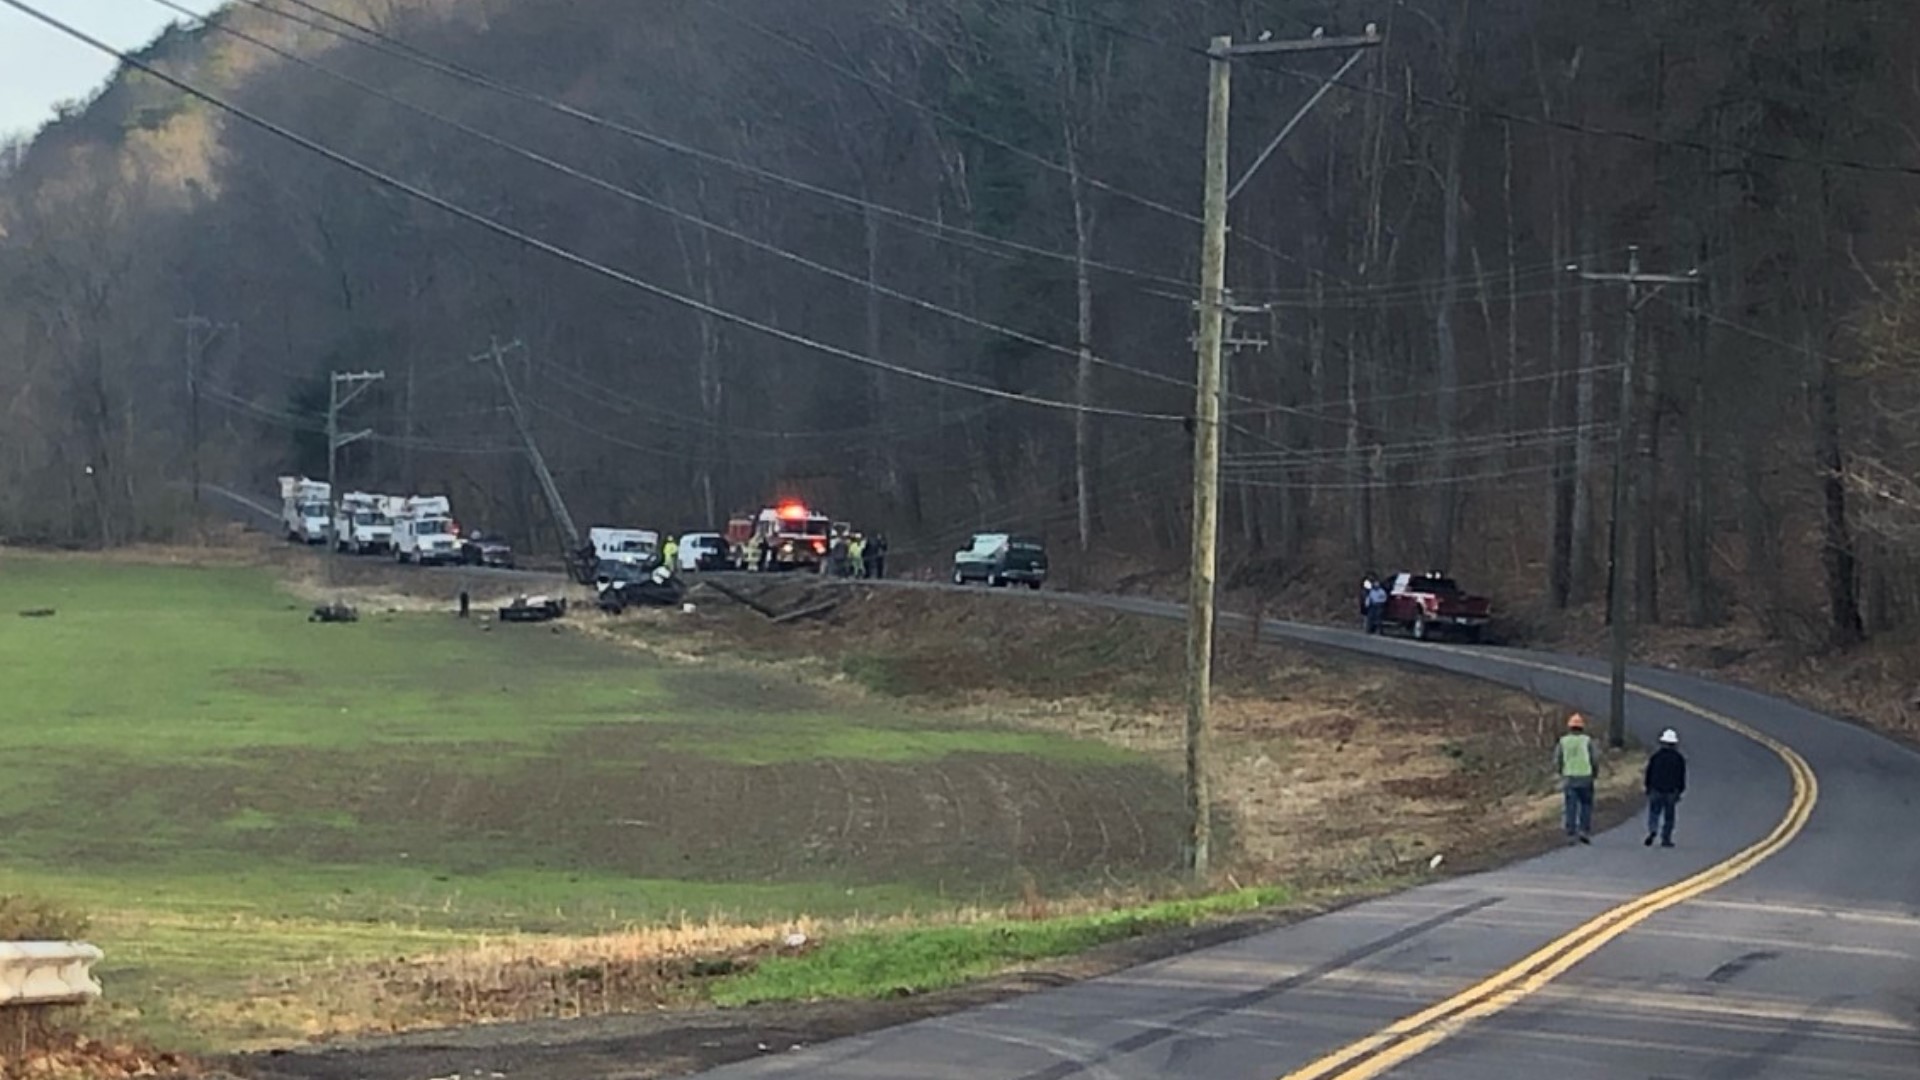 The wreck happened along Route 239 in Conyngham Township around 6:30 a.m.